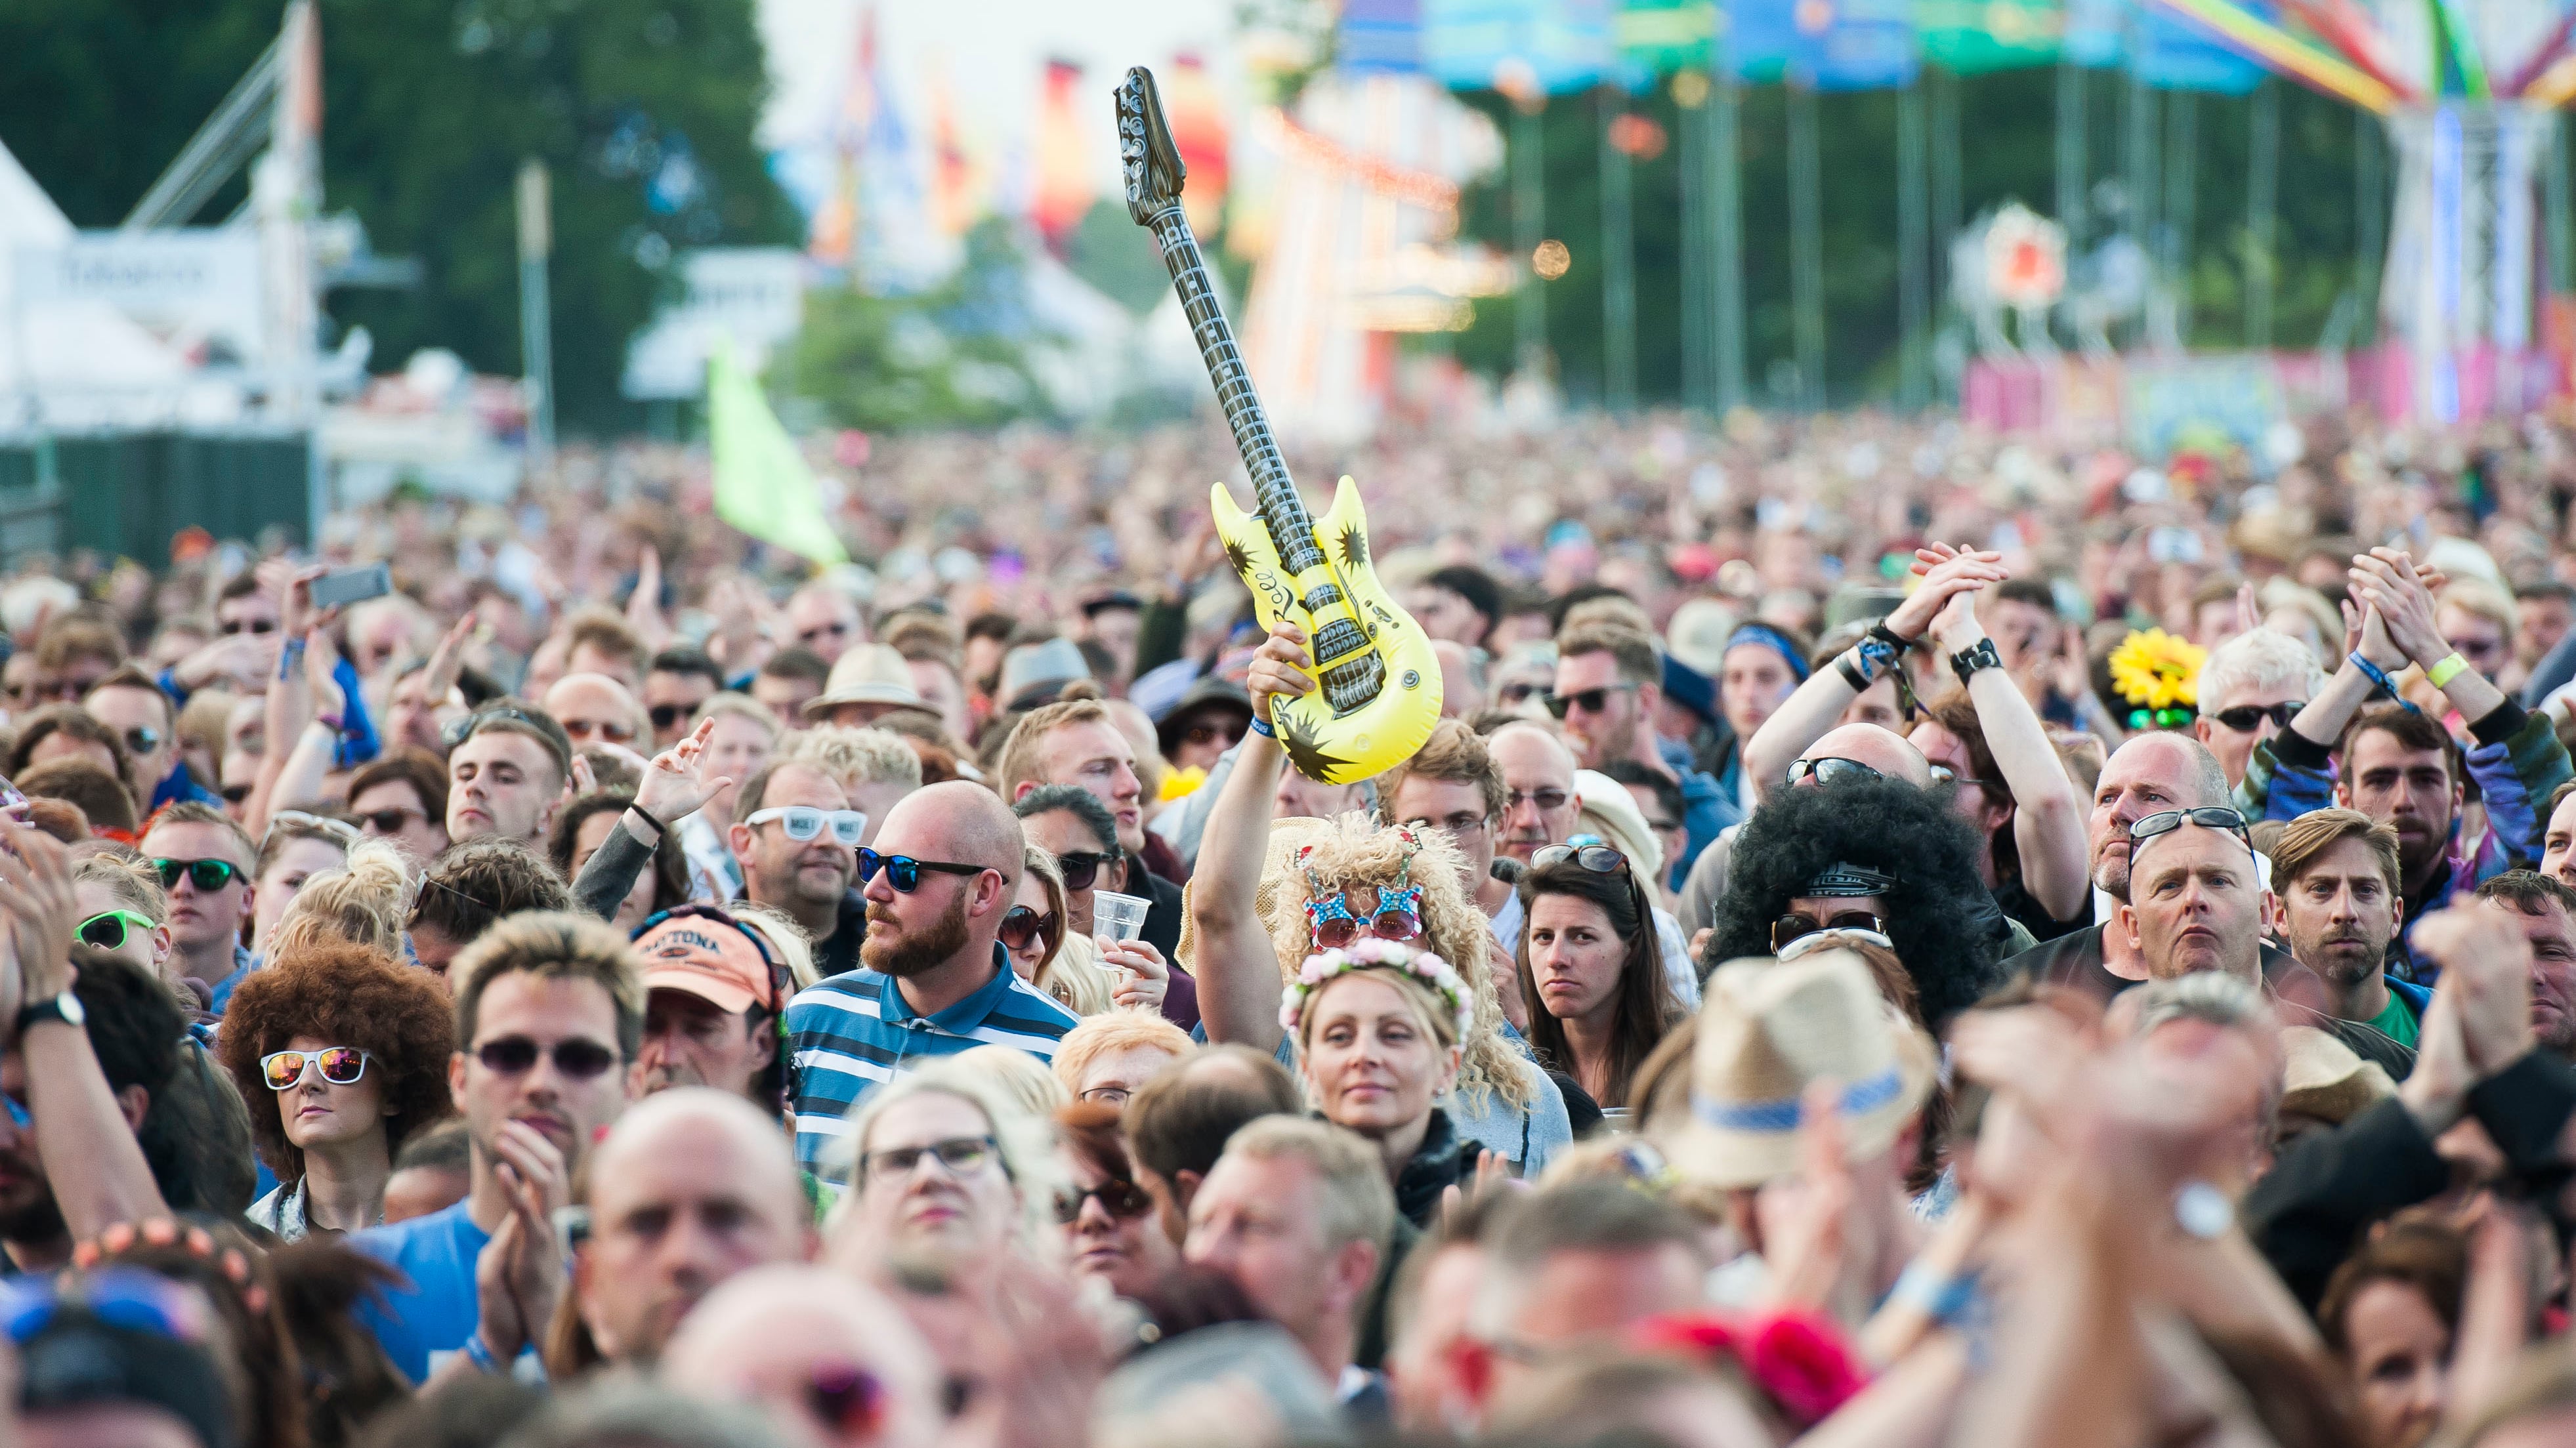 A festival goer holds an inflatable guitar at the Isle of Wight Festival, Seaclose park, Newport, on the Isle of Wight